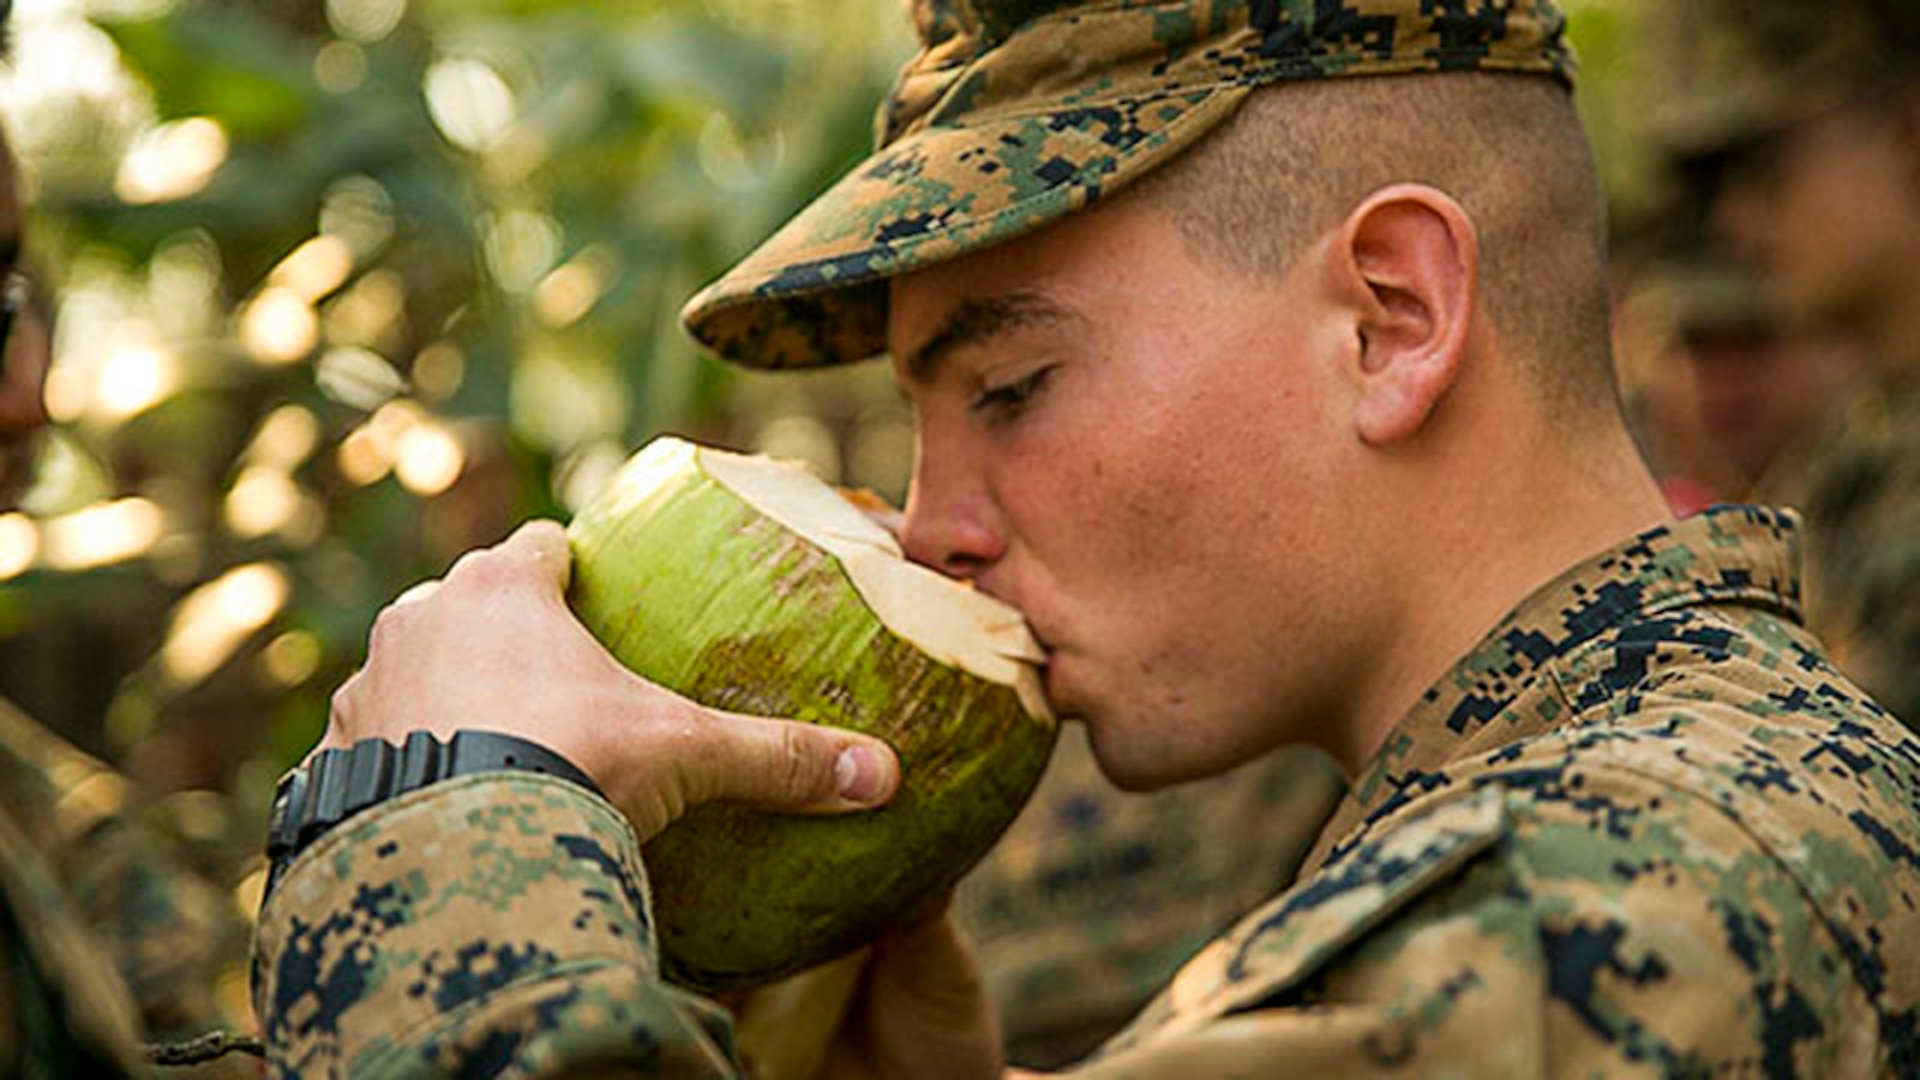 BAN CHAN KREM, Thailand (Feb. 8, 2015) - Lance Cpl. James Hutsell, from Fayetteville, N.C., drinks coconut water during exercise Cobra Gold 2015. The Royal Thai Marines shared several of their native fruits found in the jungle with U.S. Marines. Hutsell is a radio operator with 1st Battalion, 1st Marine Regiment, currently assigned to 4th Marine Regiment under the unit deployment program. 